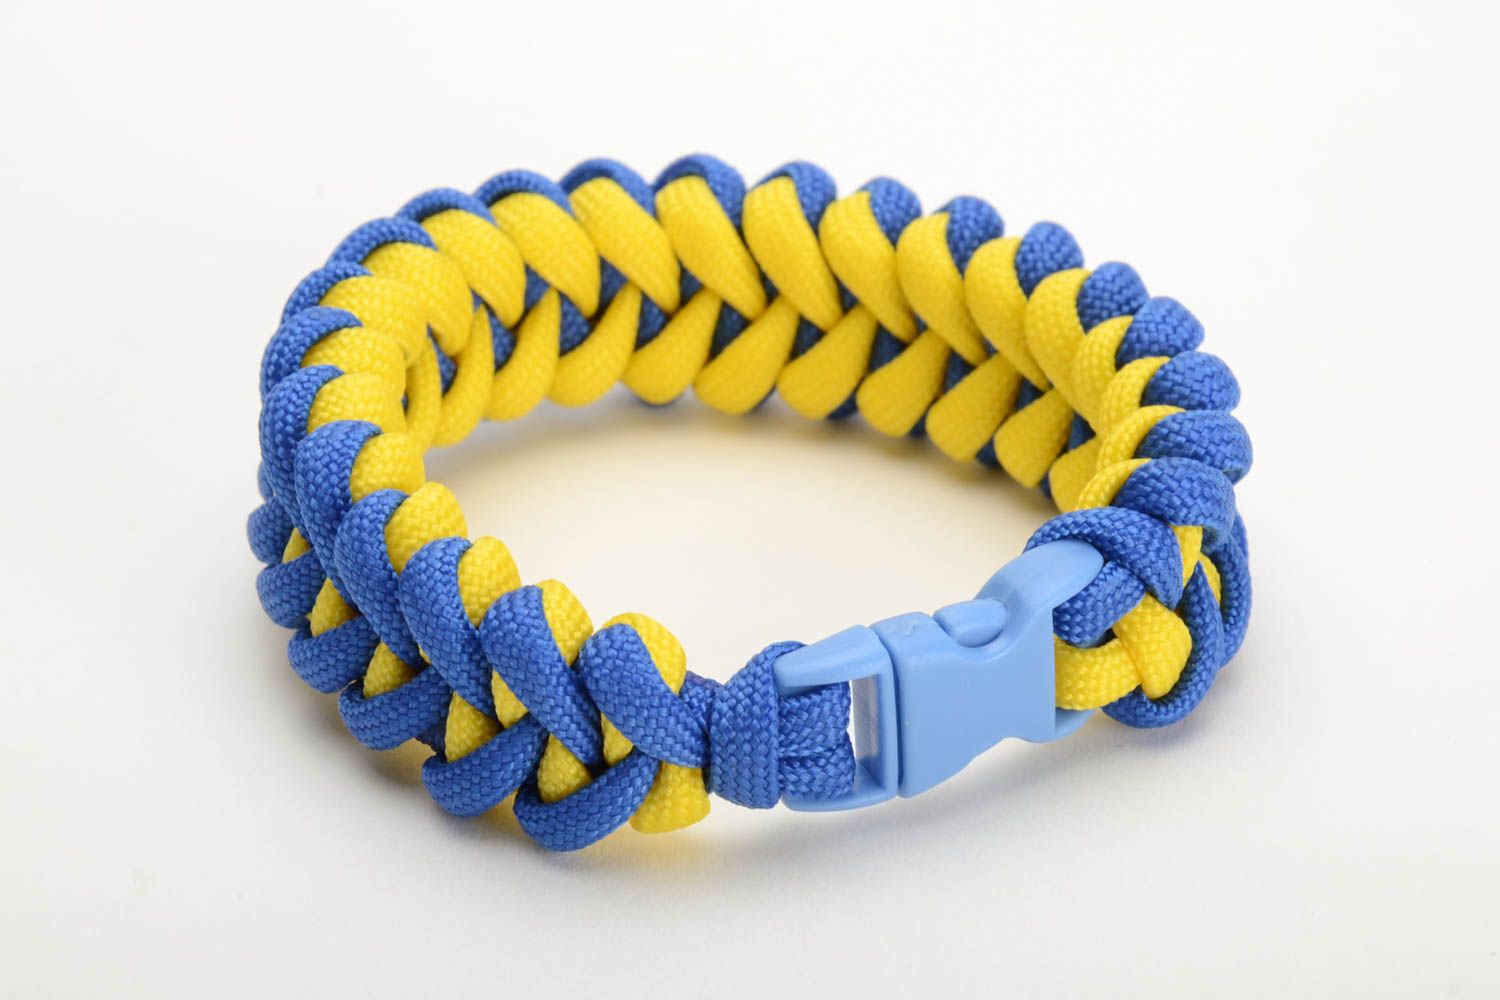 Handmade braided bracelet made of parachute cord blue and yellow unisex accessory photo 3